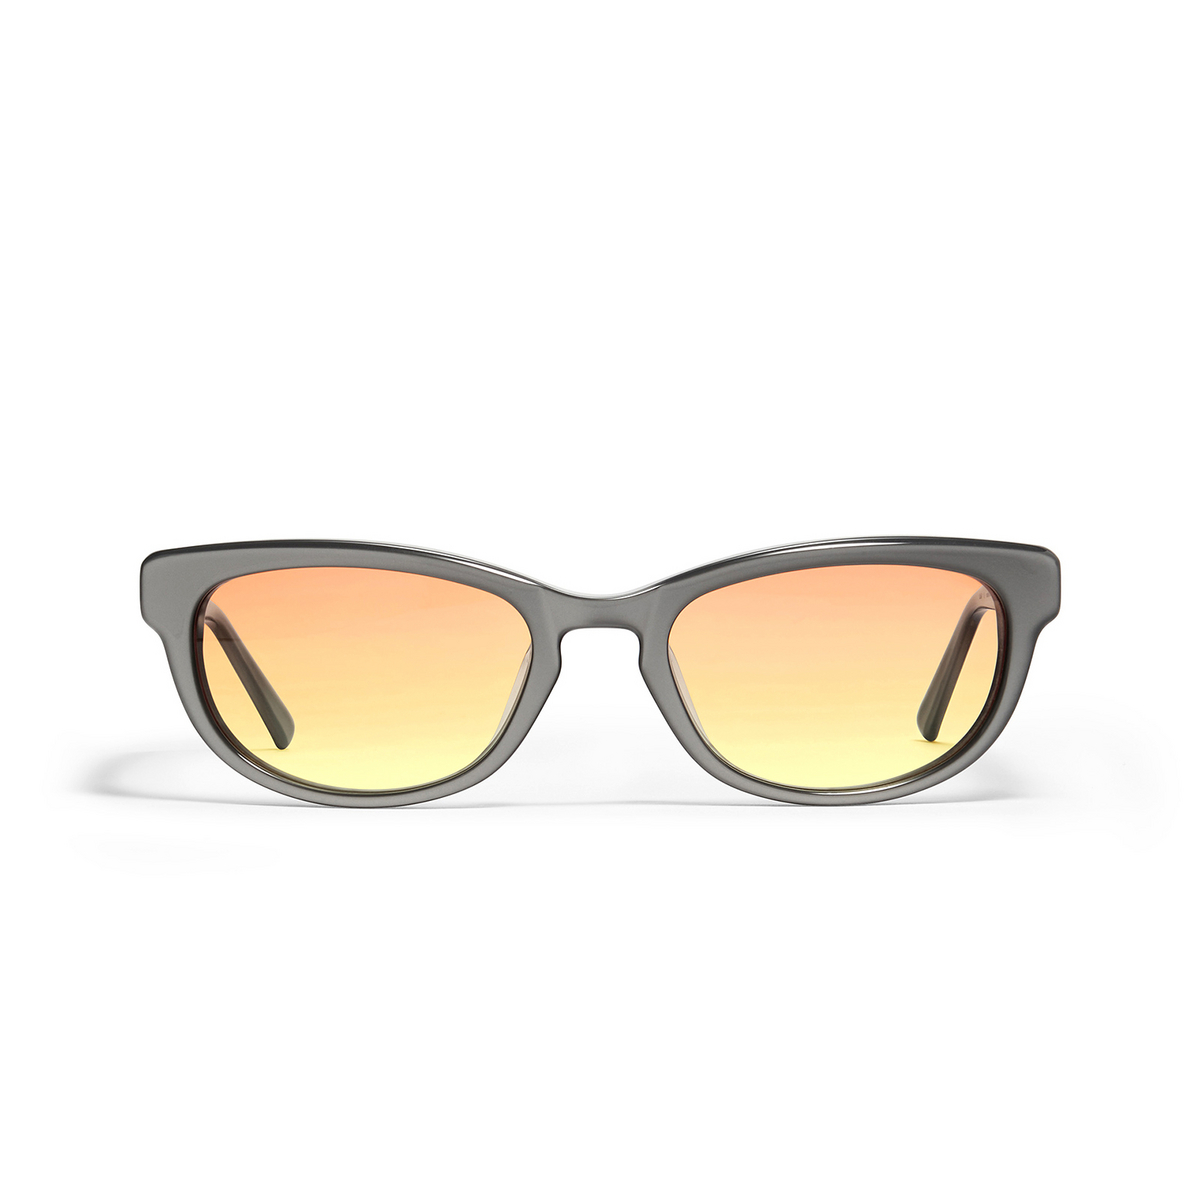 Gentle Monster® Cat-eye Sunglasses: Reny color G4 Grey - front view